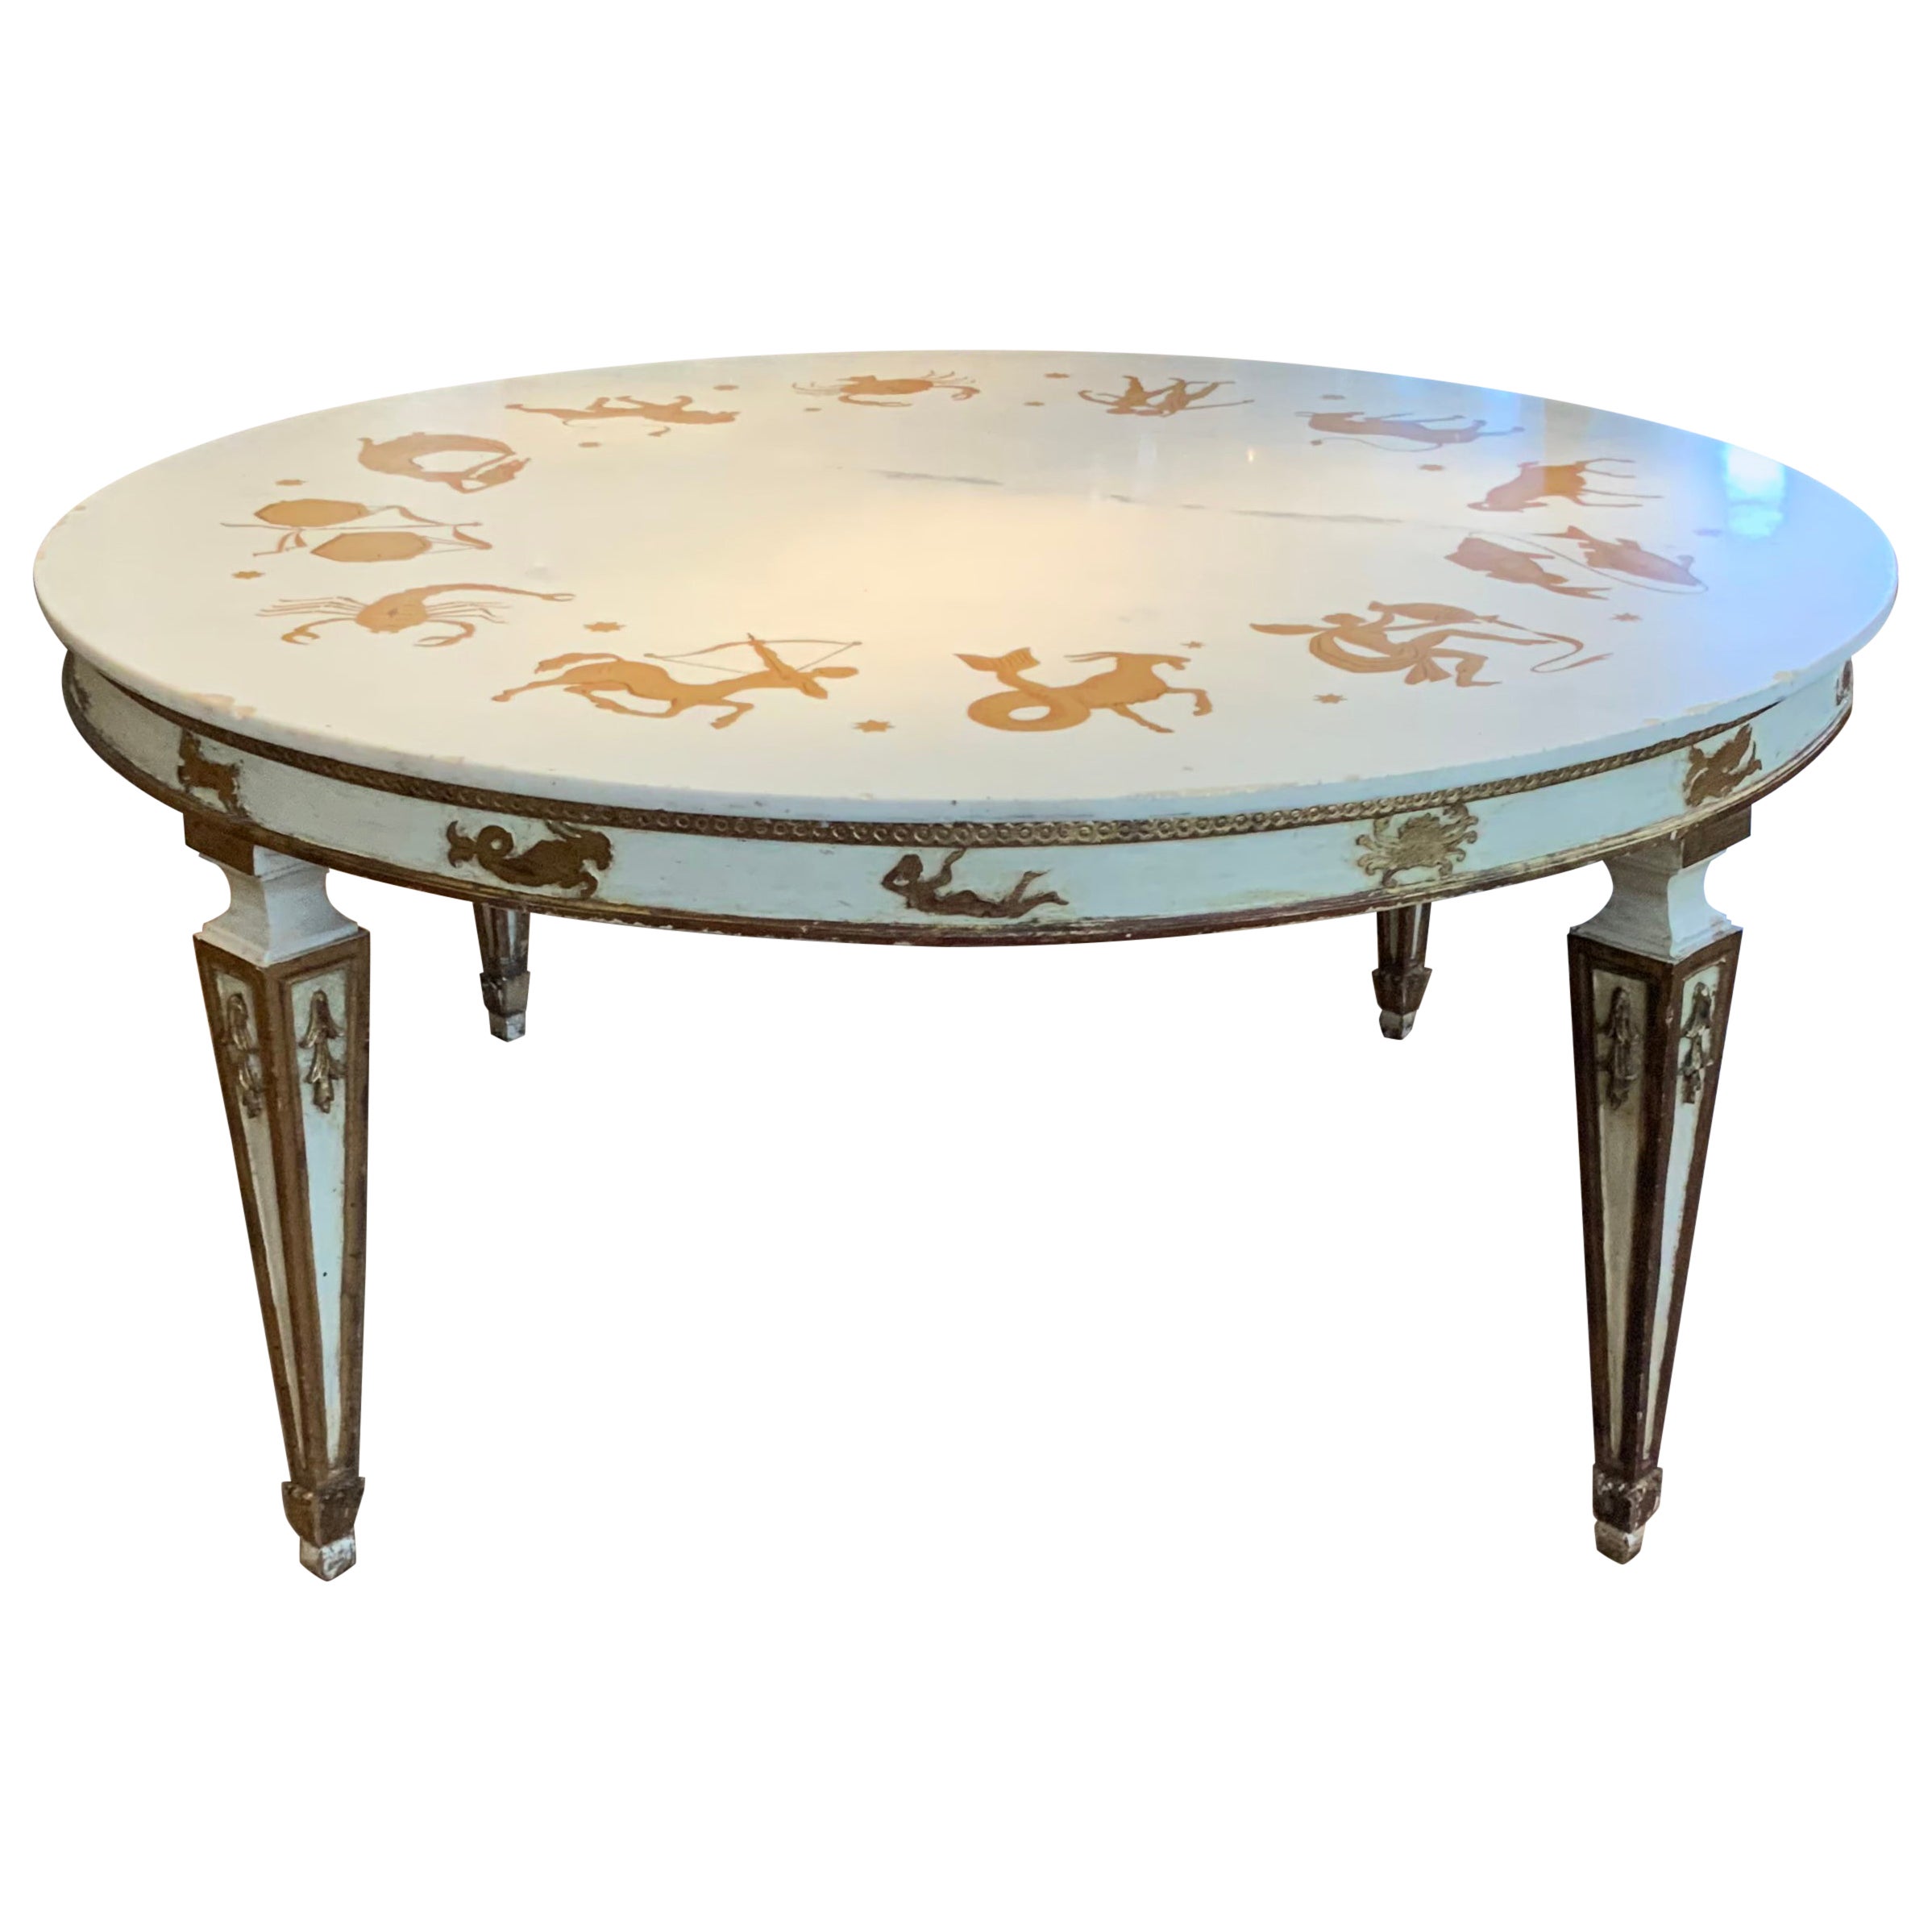 Vintage Italian Marble Dining Table with Inlaid Zodiac Signs